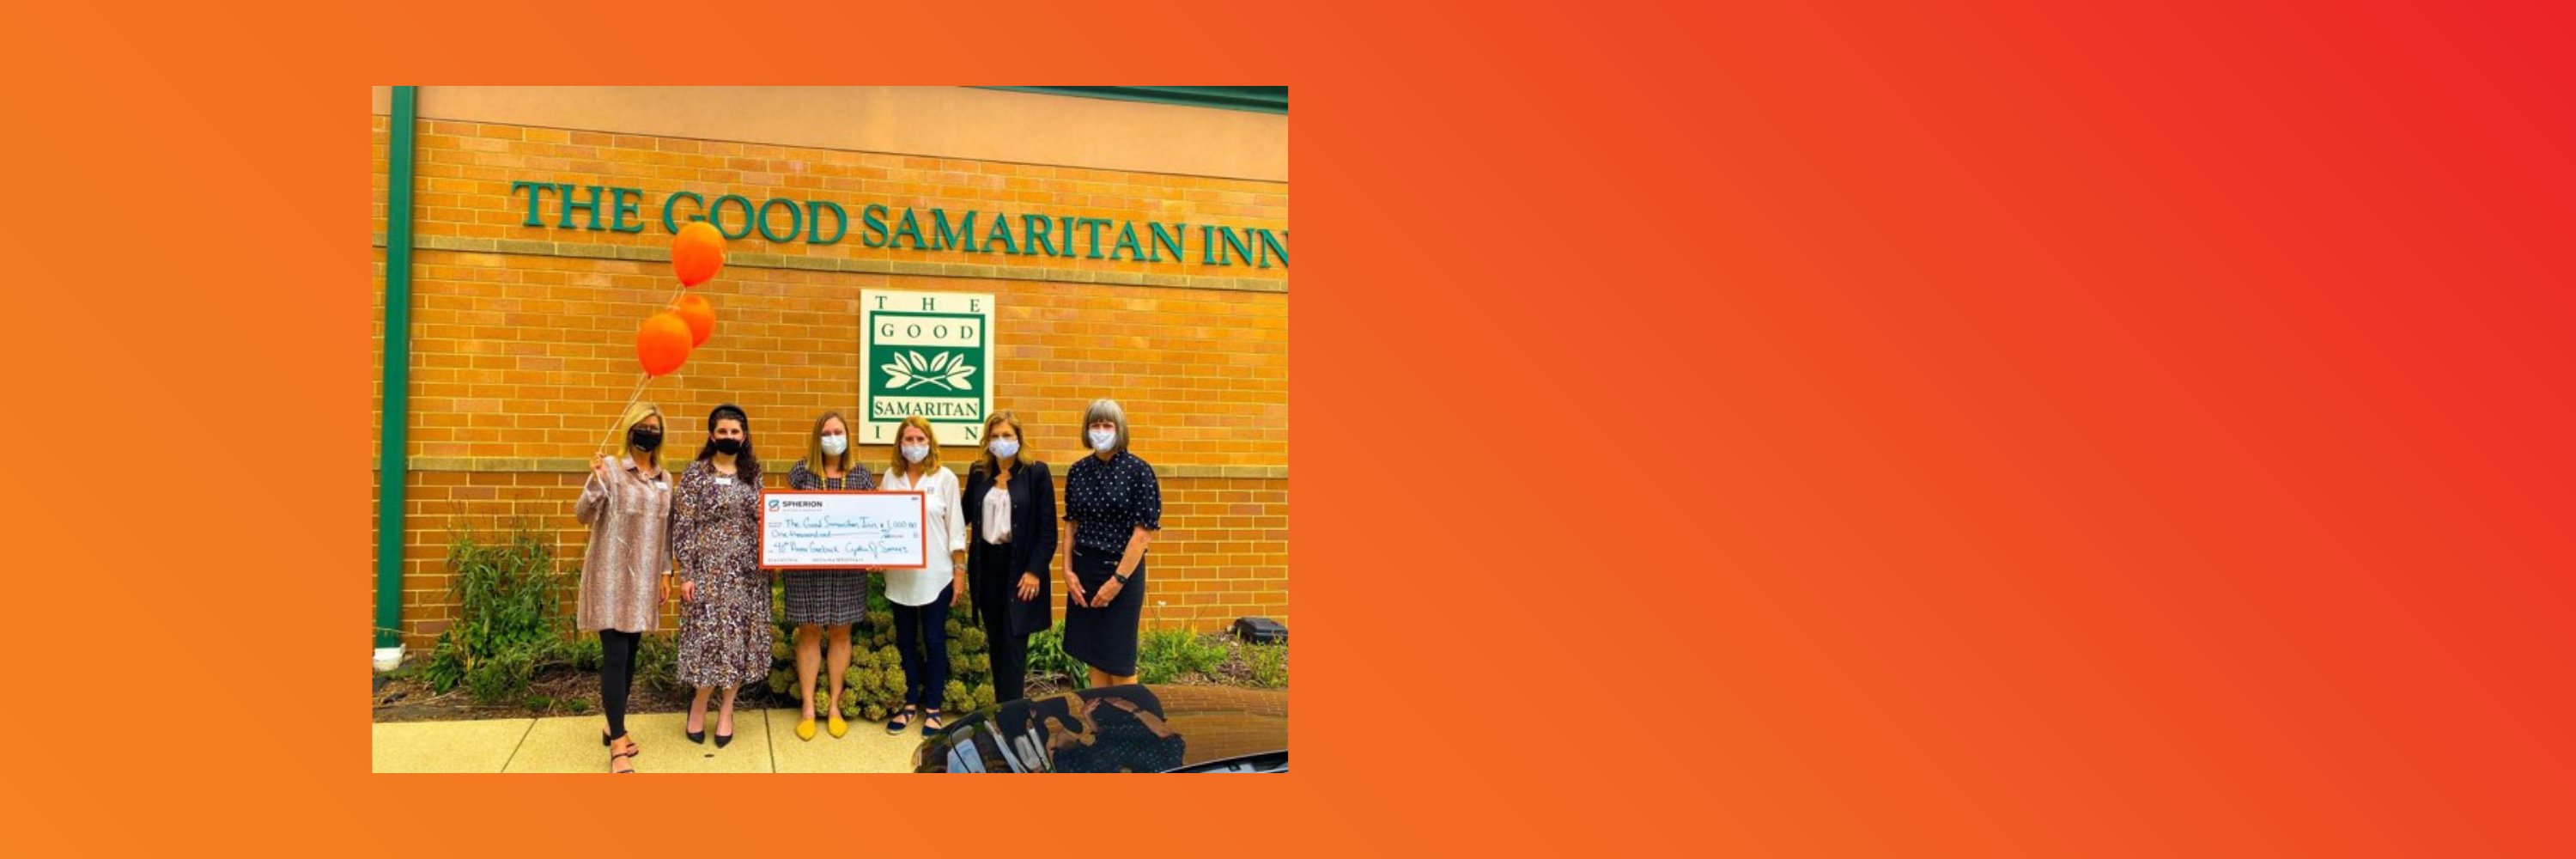 Spherion Champaign staff pose with a check donated to The Good Samaritan Inn